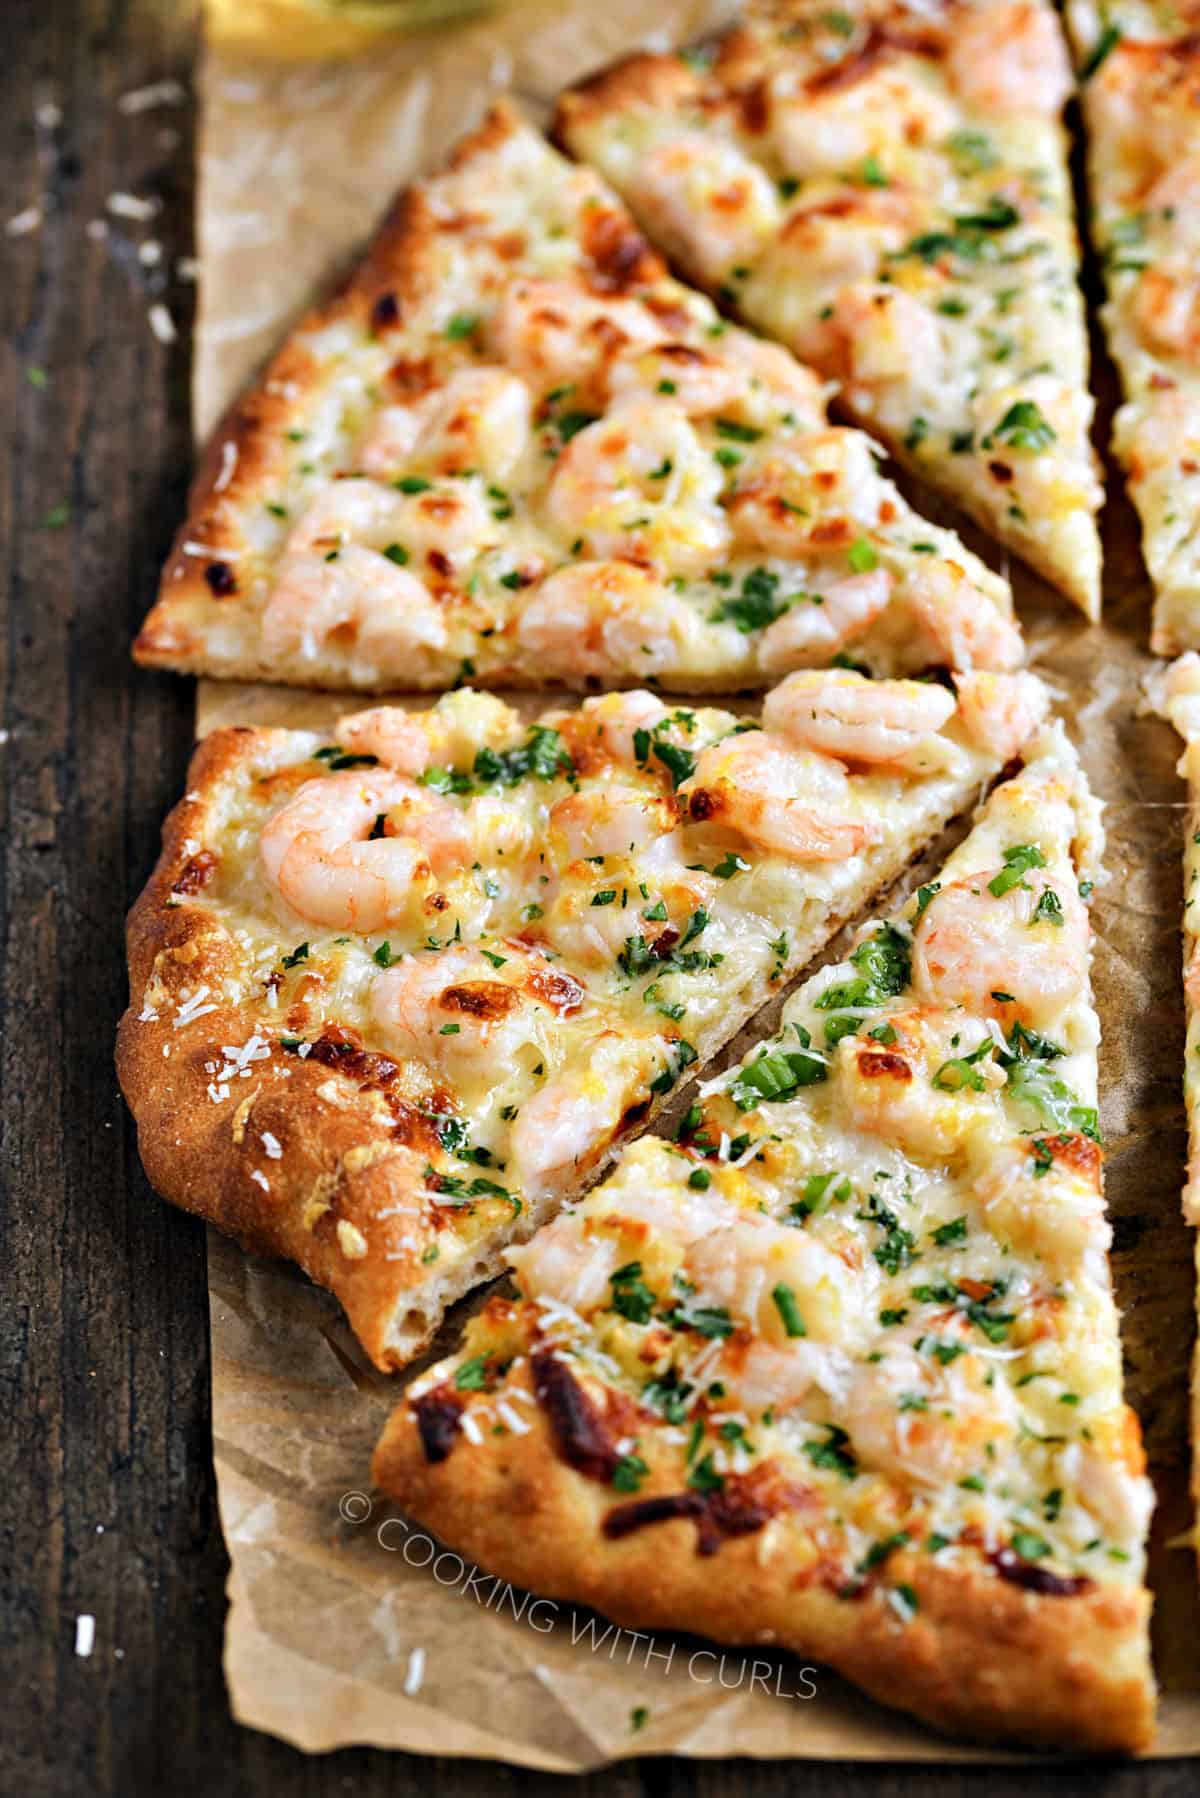 Half of a sliced shrimp pizza on a sheet of parchment paper.